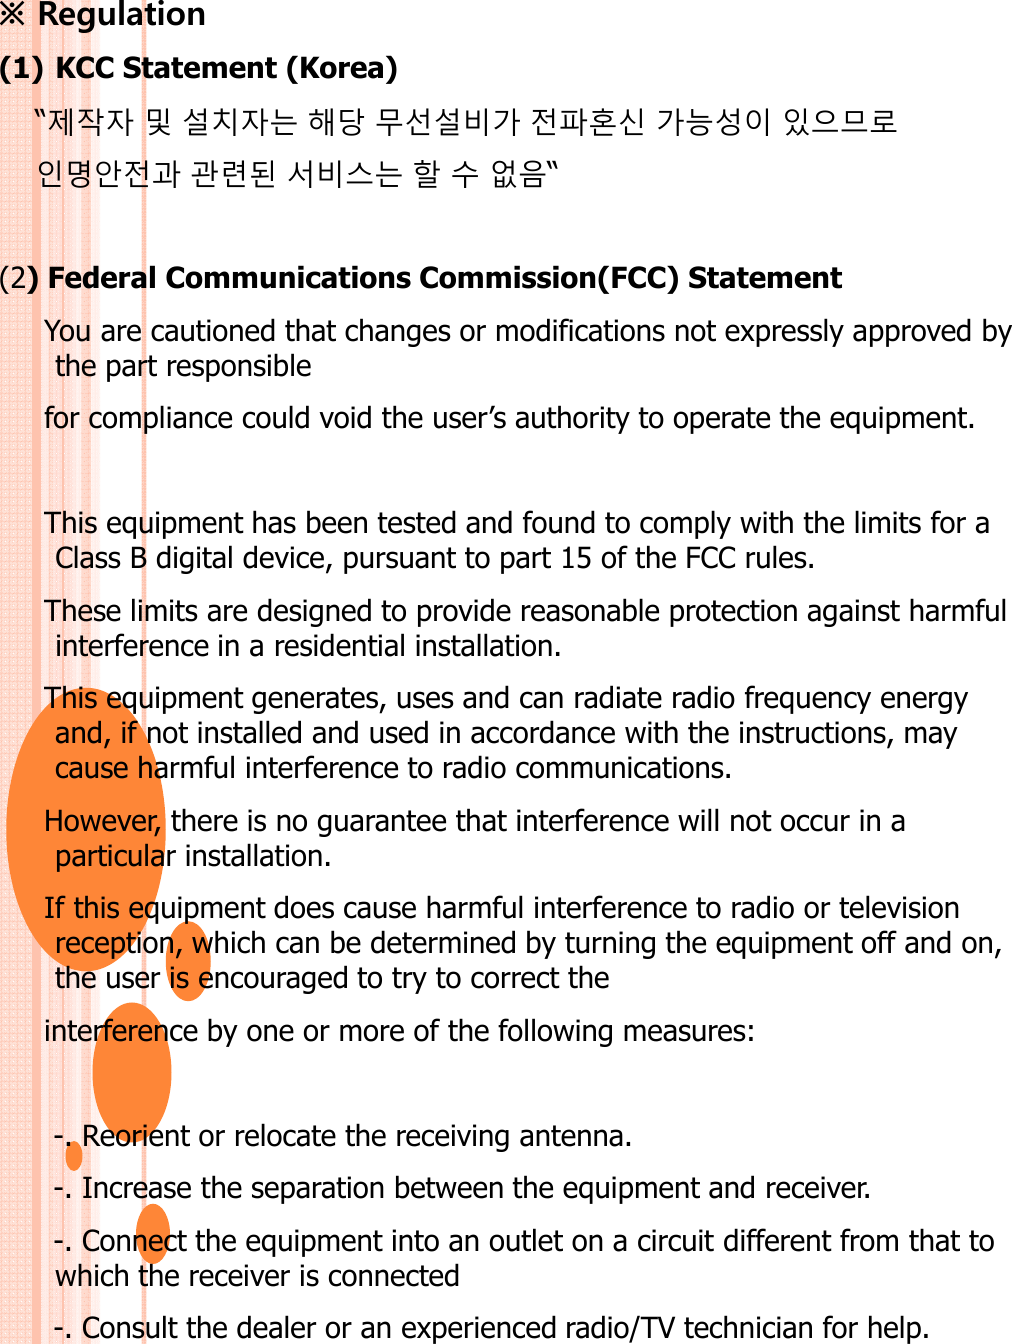 ※ Regulation (1) KCC Statement (Korea)“제작자 및 설치자는 해당 무선설비가 전파혼신 가능성이 있으므로인명안전과 관련된 서비스는 할 수 없음“(2) Federal Communications Commission(FCC) StatementYou are cautioned that changes or modifications not expressly approved by the part responsiblefor compliance could void the user’s authority to operate the equipment.This equipment has been tested and found to comply with the limits for a Class B digital device, pursuant to part 15 of the FCC rules.These limits are designed to provide reasonable protection against harmful interference in a residential installation.This equipment generates, uses and can radiate radio frequency energy This equipment generates, uses and can radiate radio frequency energy and, if not installed and used in accordance with the instructions, may cause harmful interference to radio communications.However, there is no guarantee that interference will not occur in a particular installation.If this equipment does cause harmful interference to radio or television reception, which can be determined by turning the equipment off and on, the user is encouraged to try to correct the interference by one or more of the following measures:-. Reorient or relocate the receiving antenna.-. Increase the separation between the equipment and receiver.-. Connect the equipment into an outlet on a circuit different from that to which the receiver is connected-. Consult the dealer or an experienced radio/TV technician for help.